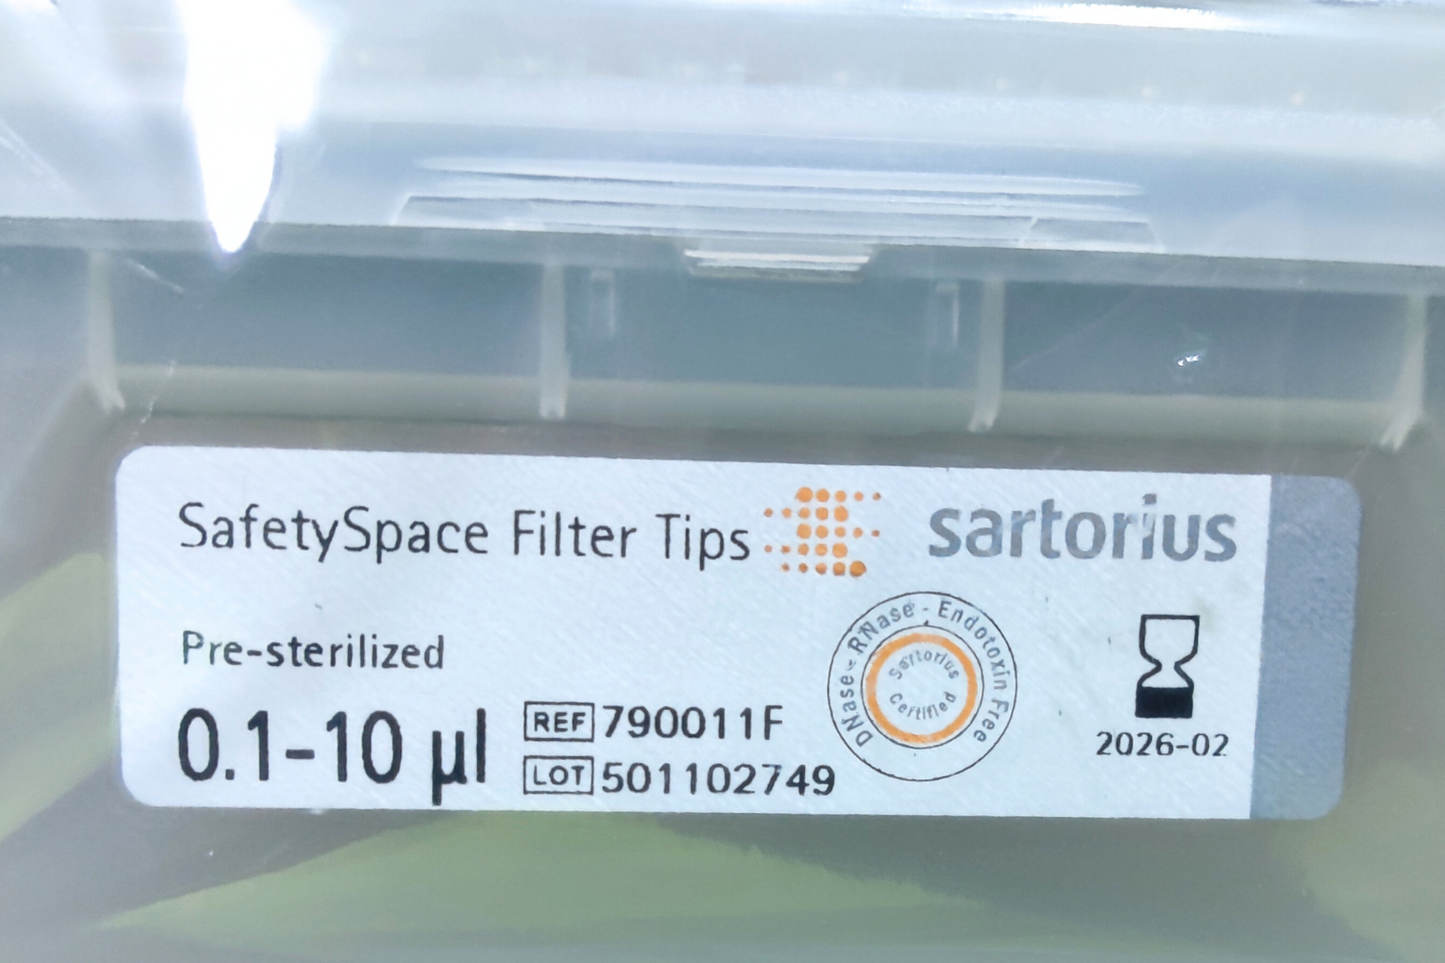 SafetySpace Filter Tip, 0.1­-10μl, low retention, racked, Pre­sterilized Filtered Pack of 10x 96 (790011F)